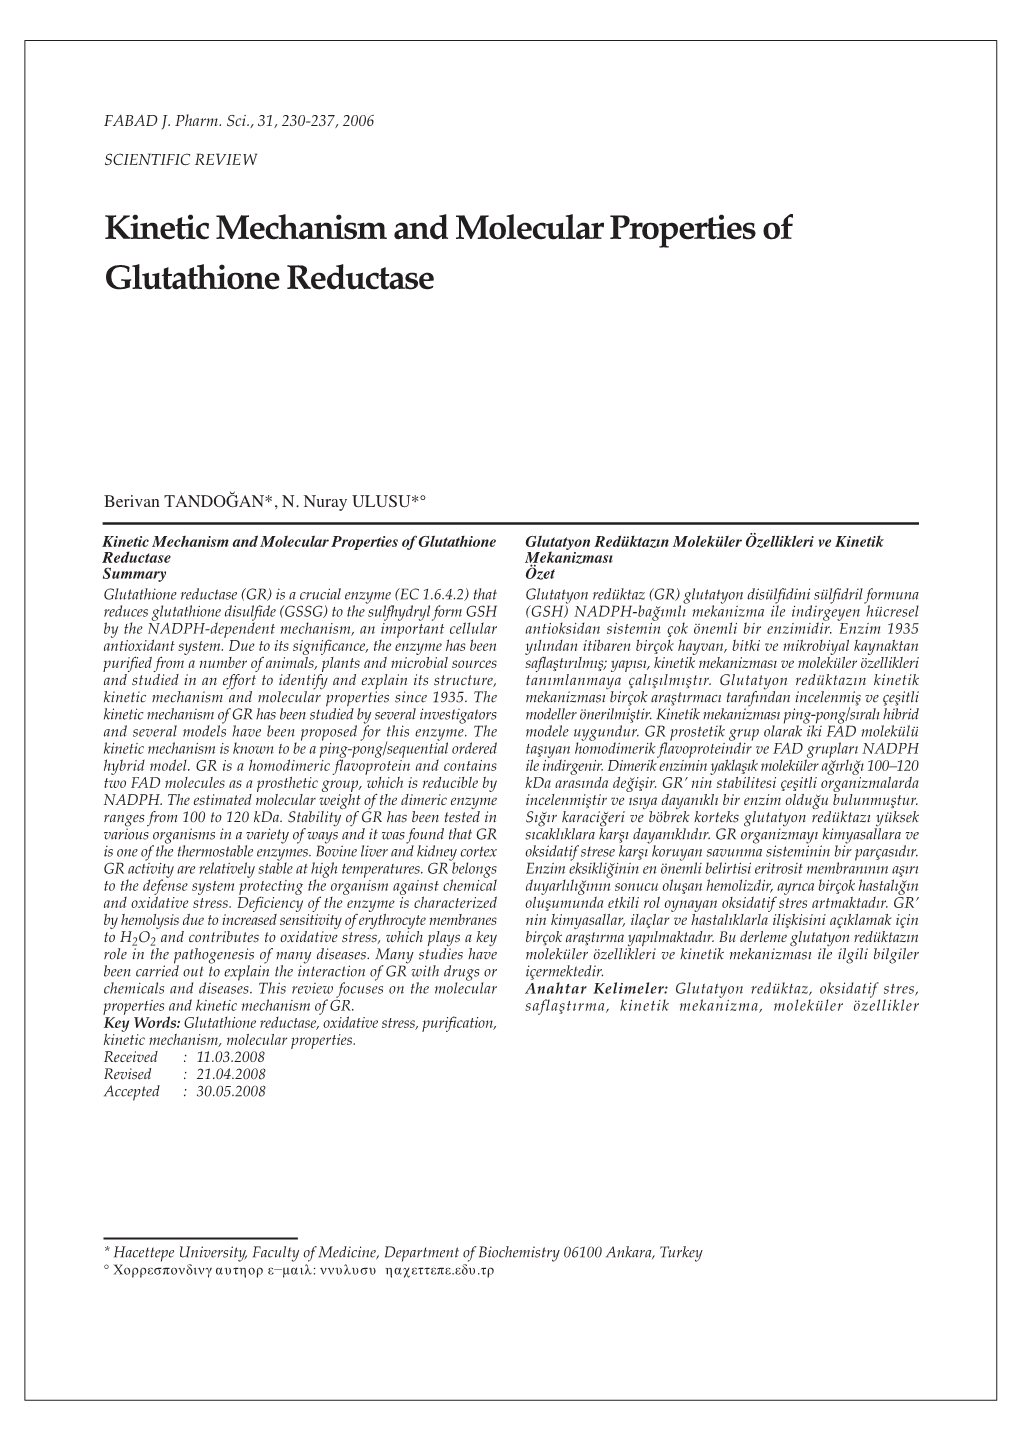 Kinetic Mechanism and Molecular Properties of Glutathione Reductase